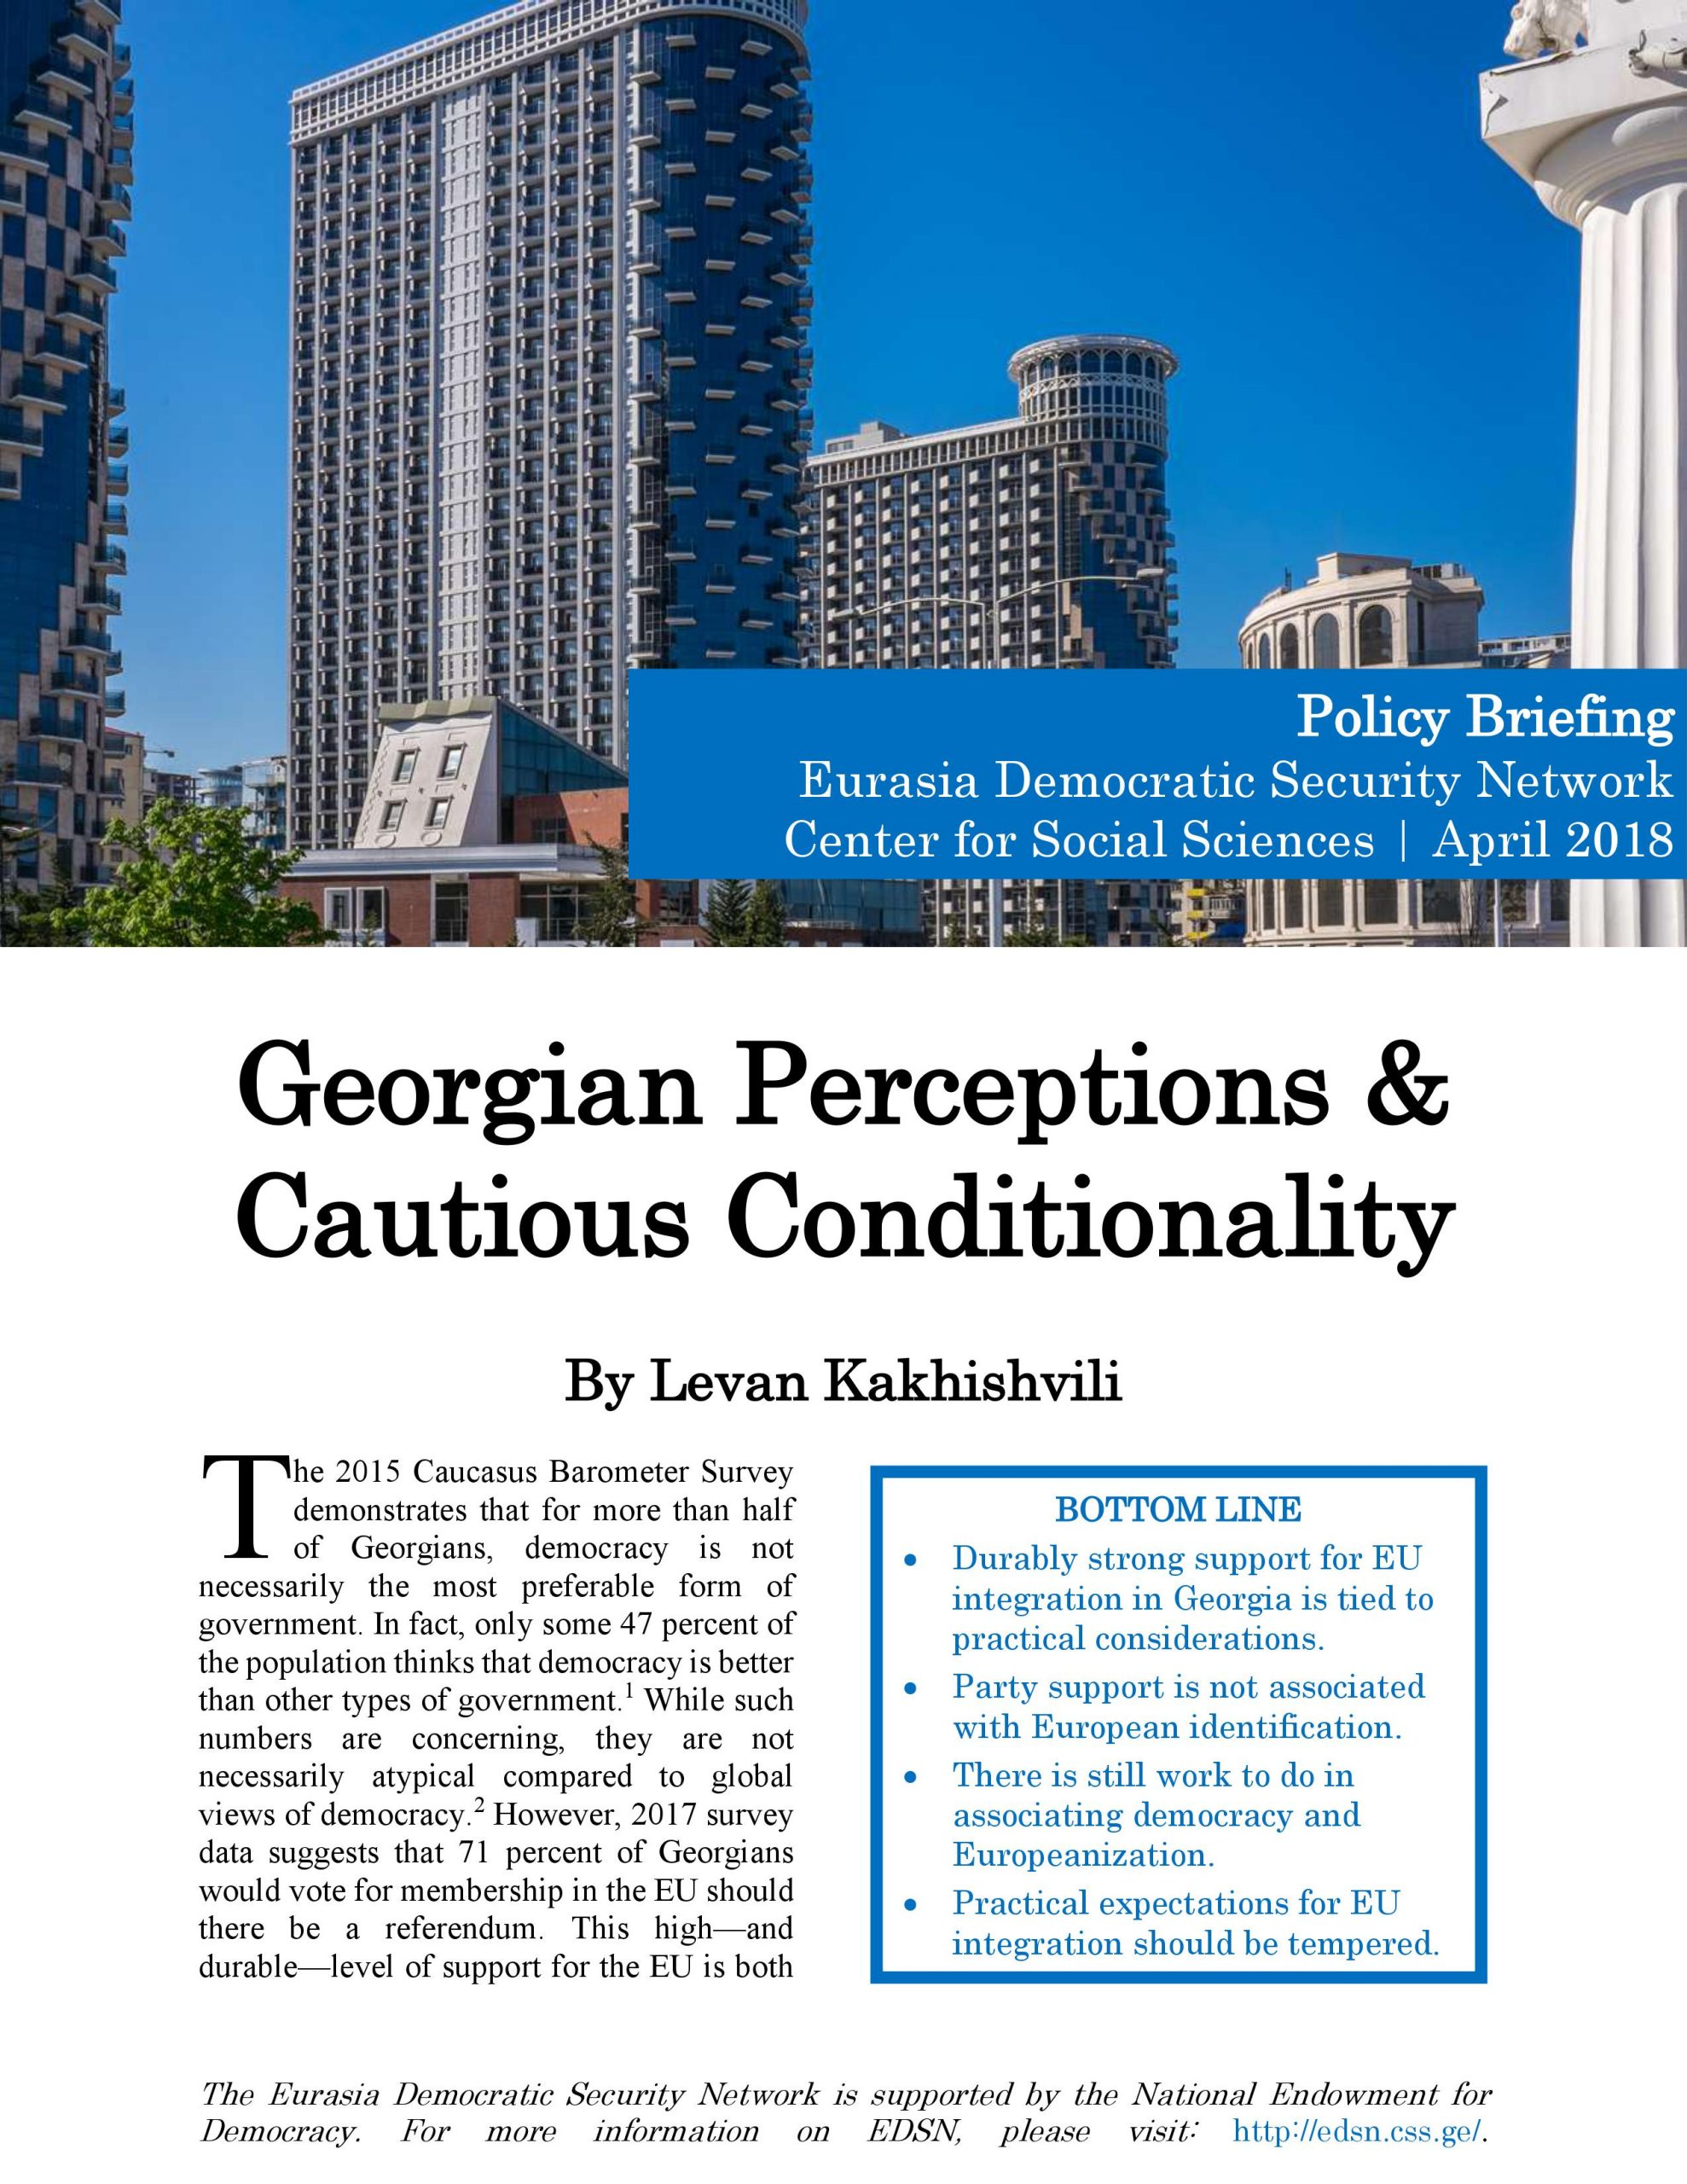 POLICY BRIEFING: Georgian Perceptions & Cautious Conditionality